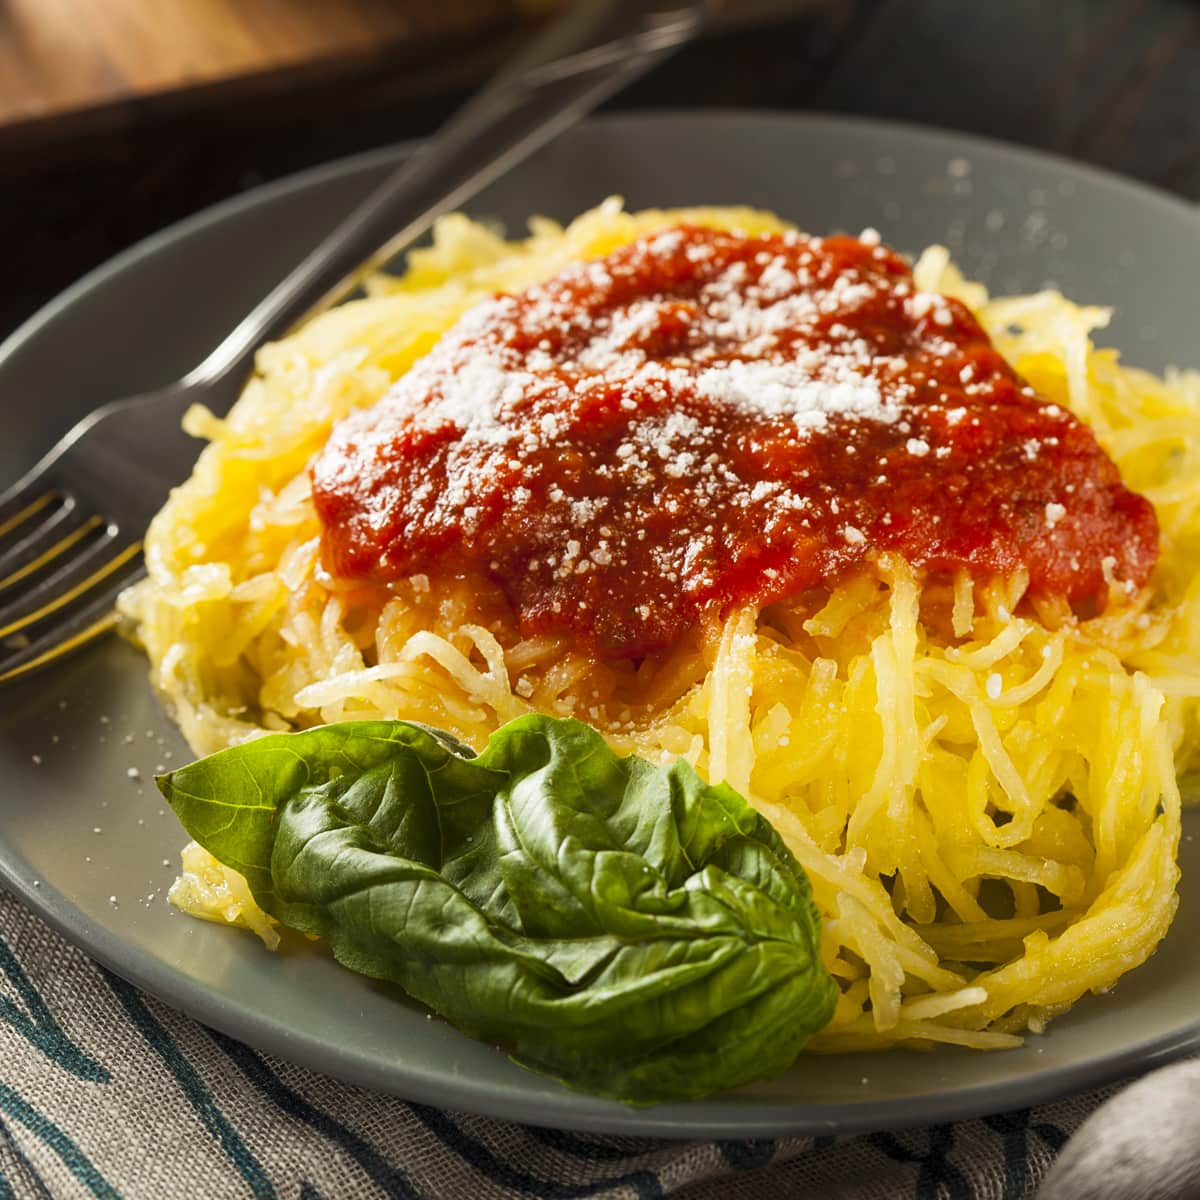 Close look of a gray plate with spaghetti squash, a basil leaf, and tomato sauce.